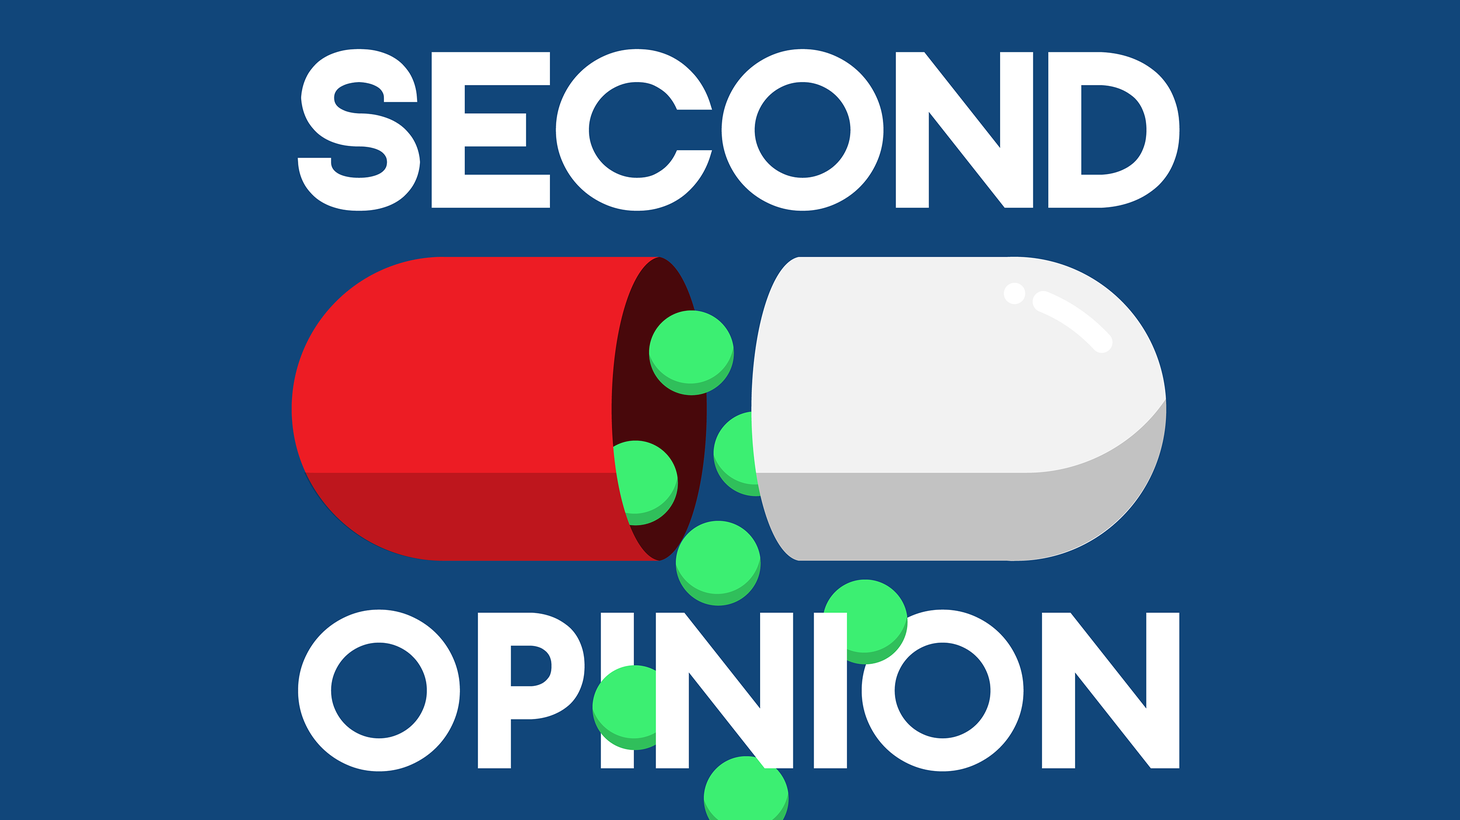 The new legislation offers some major successes, but with regard to drug pricing it is not close to what it could have been.